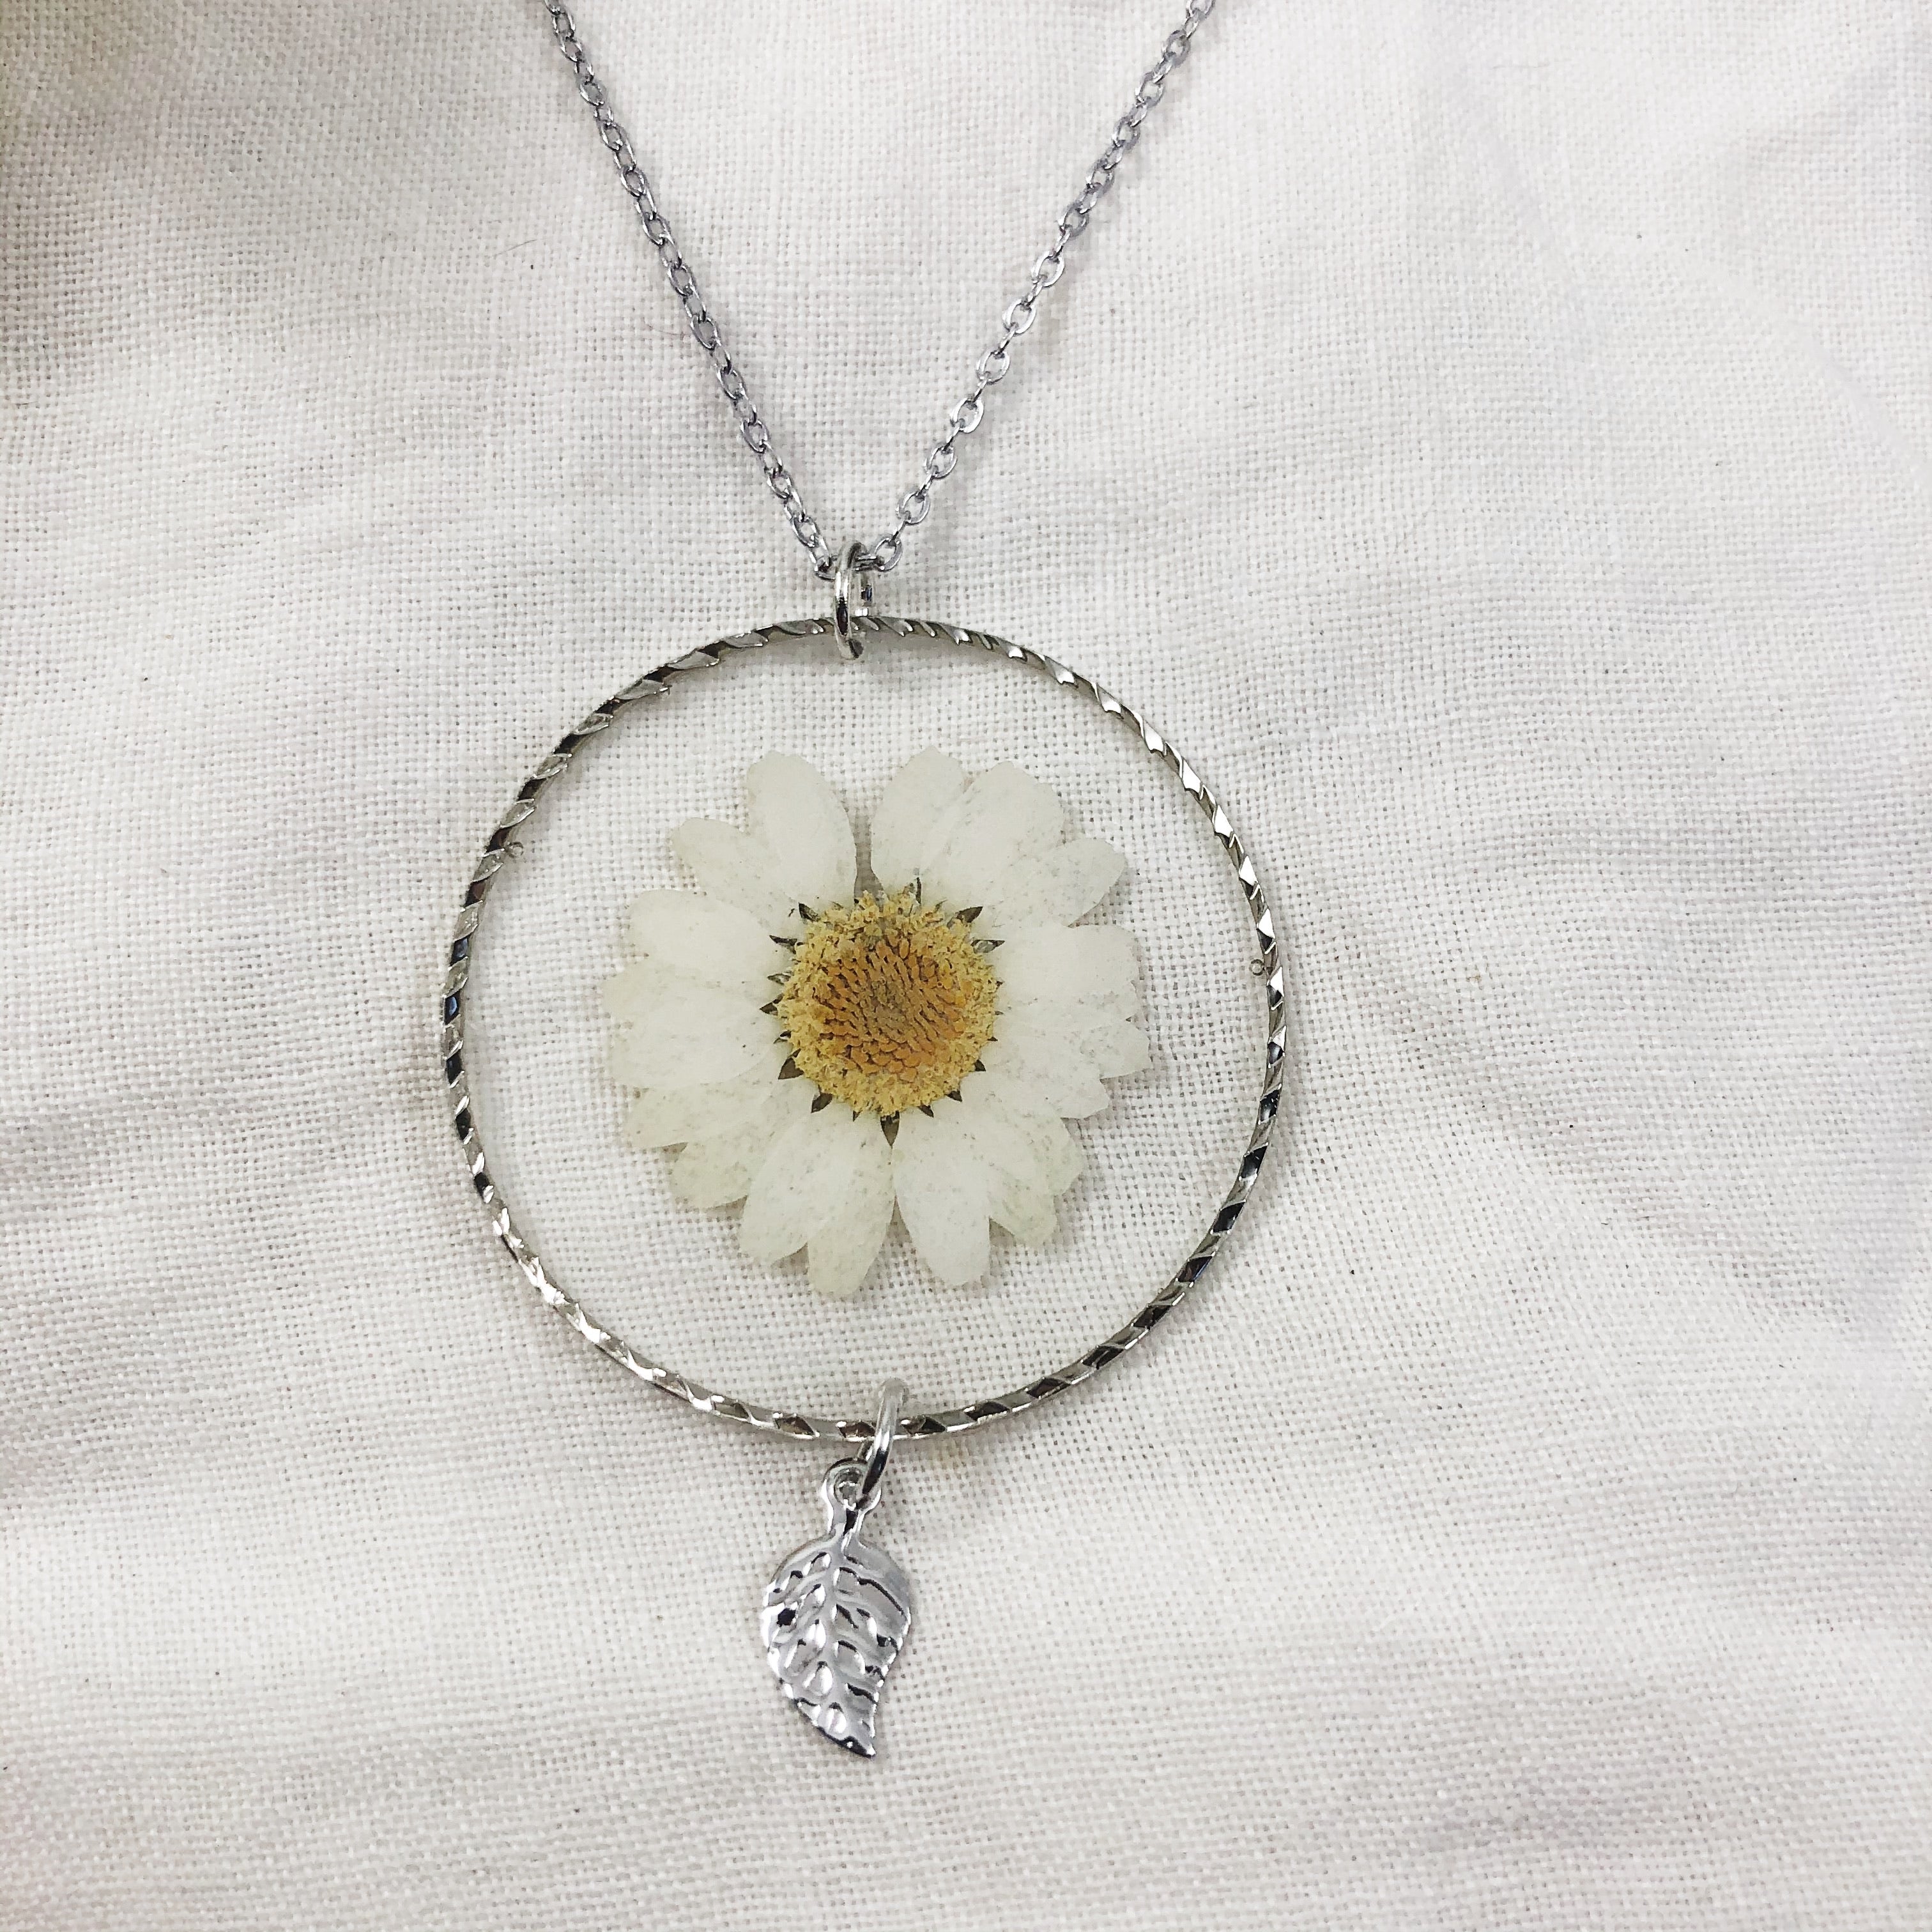 Silver Daisy Necklace with Leaf Charm